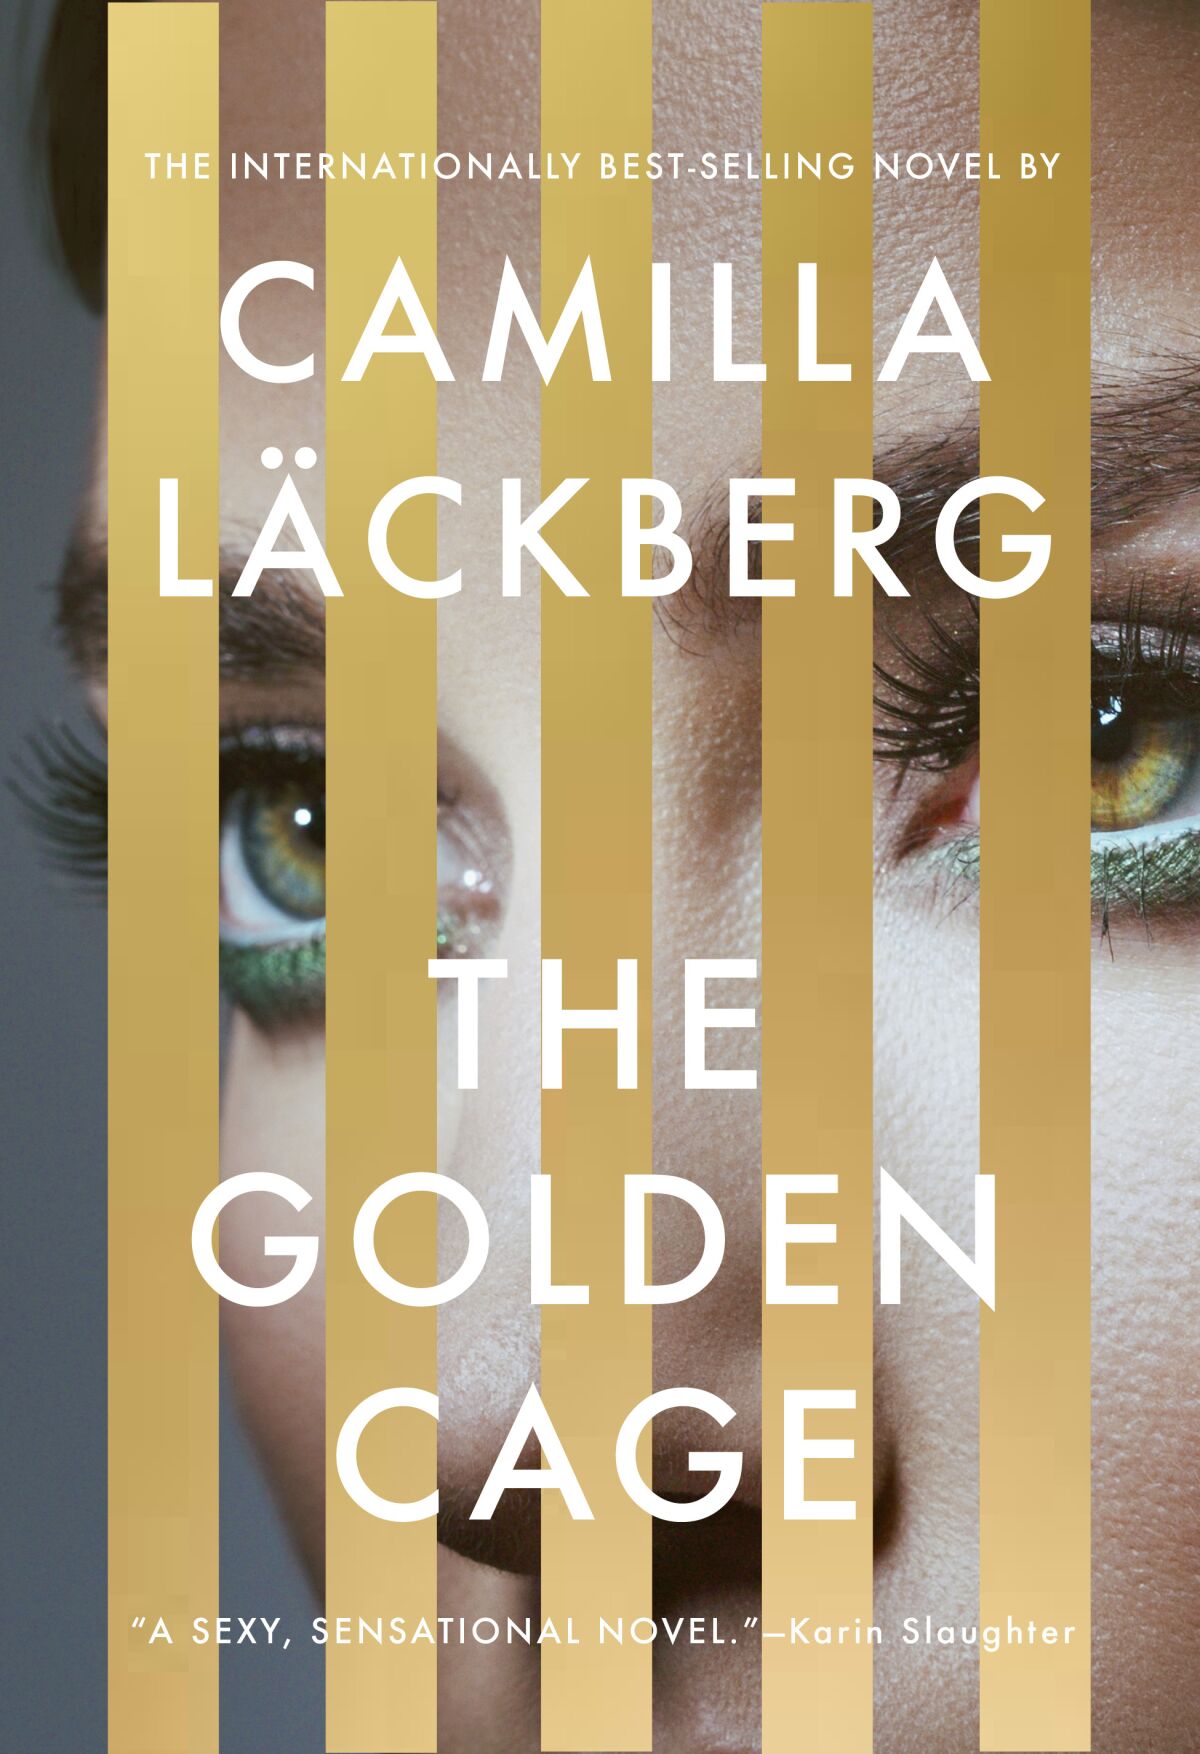 A book jacket for "The Golden Cage," by Camilla Lackberg. Credit: Knopf